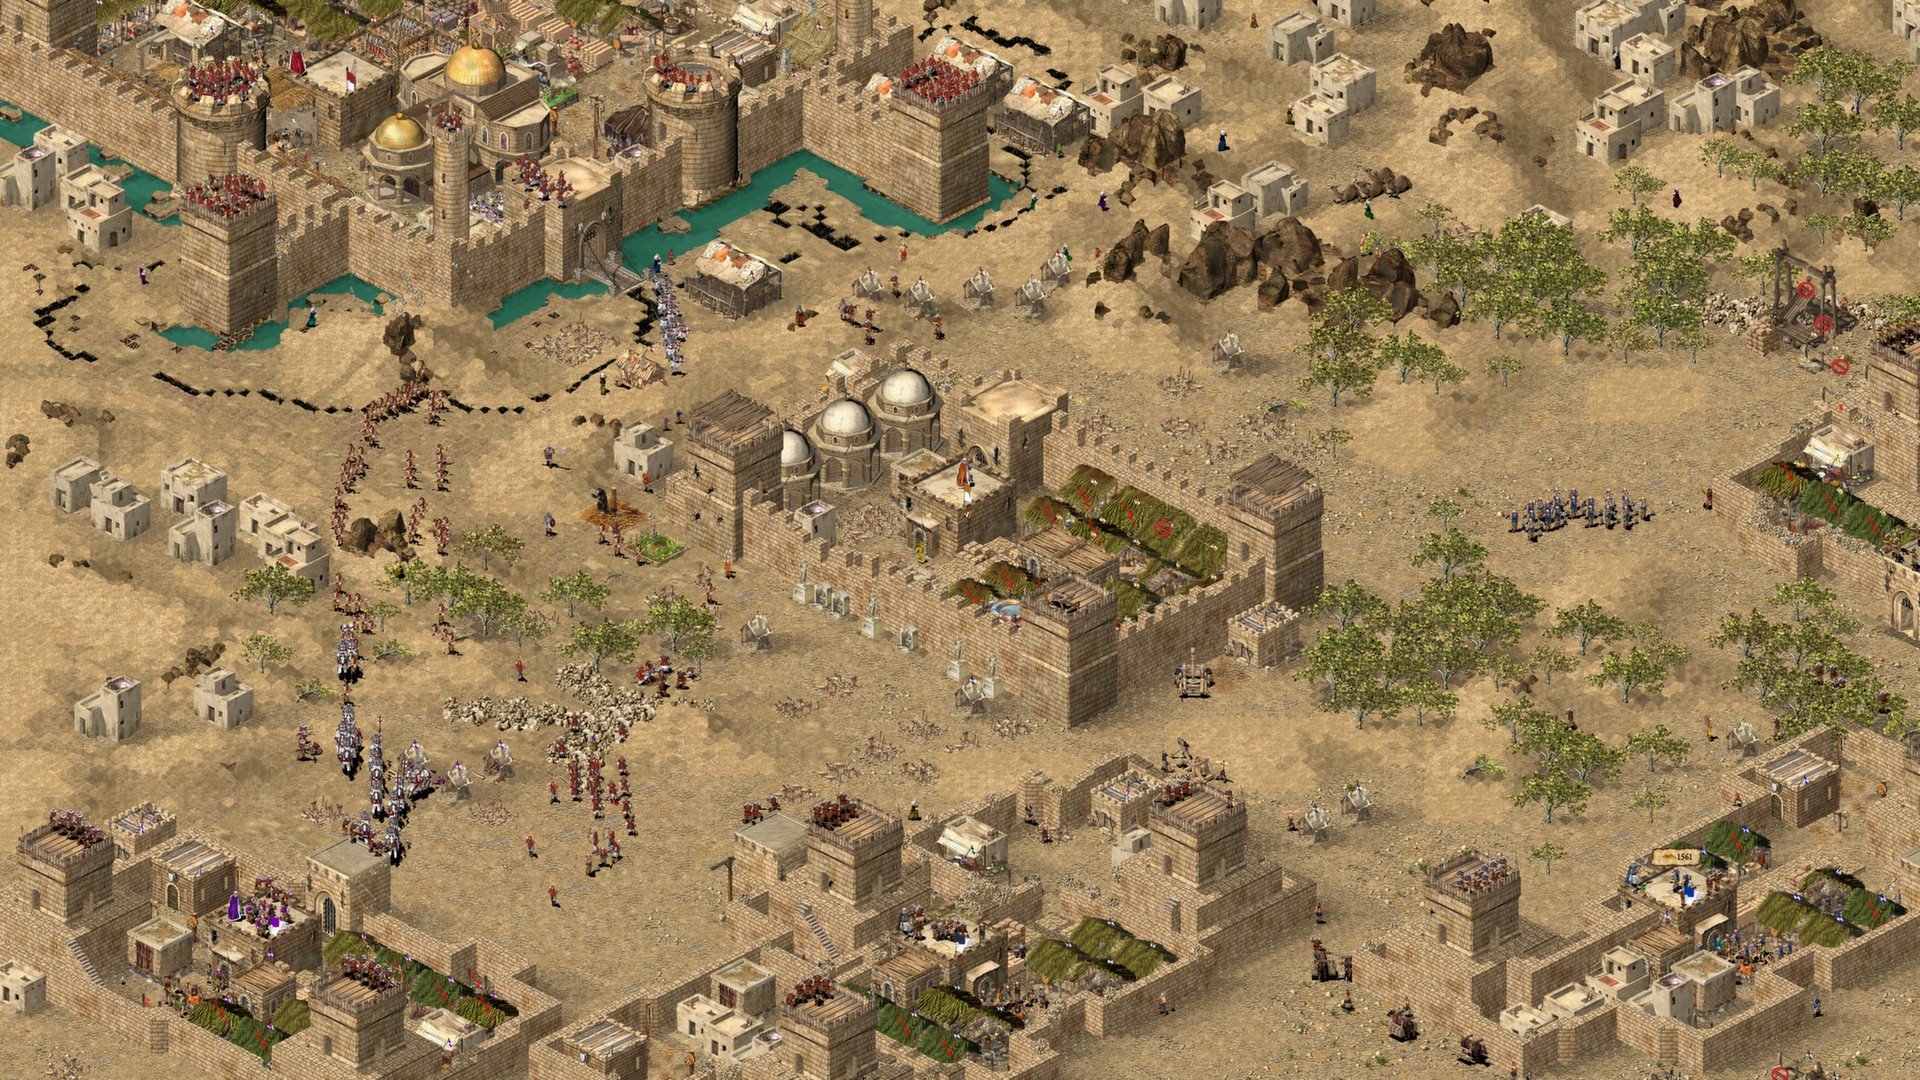 Stronghold Crusader HD on Steam